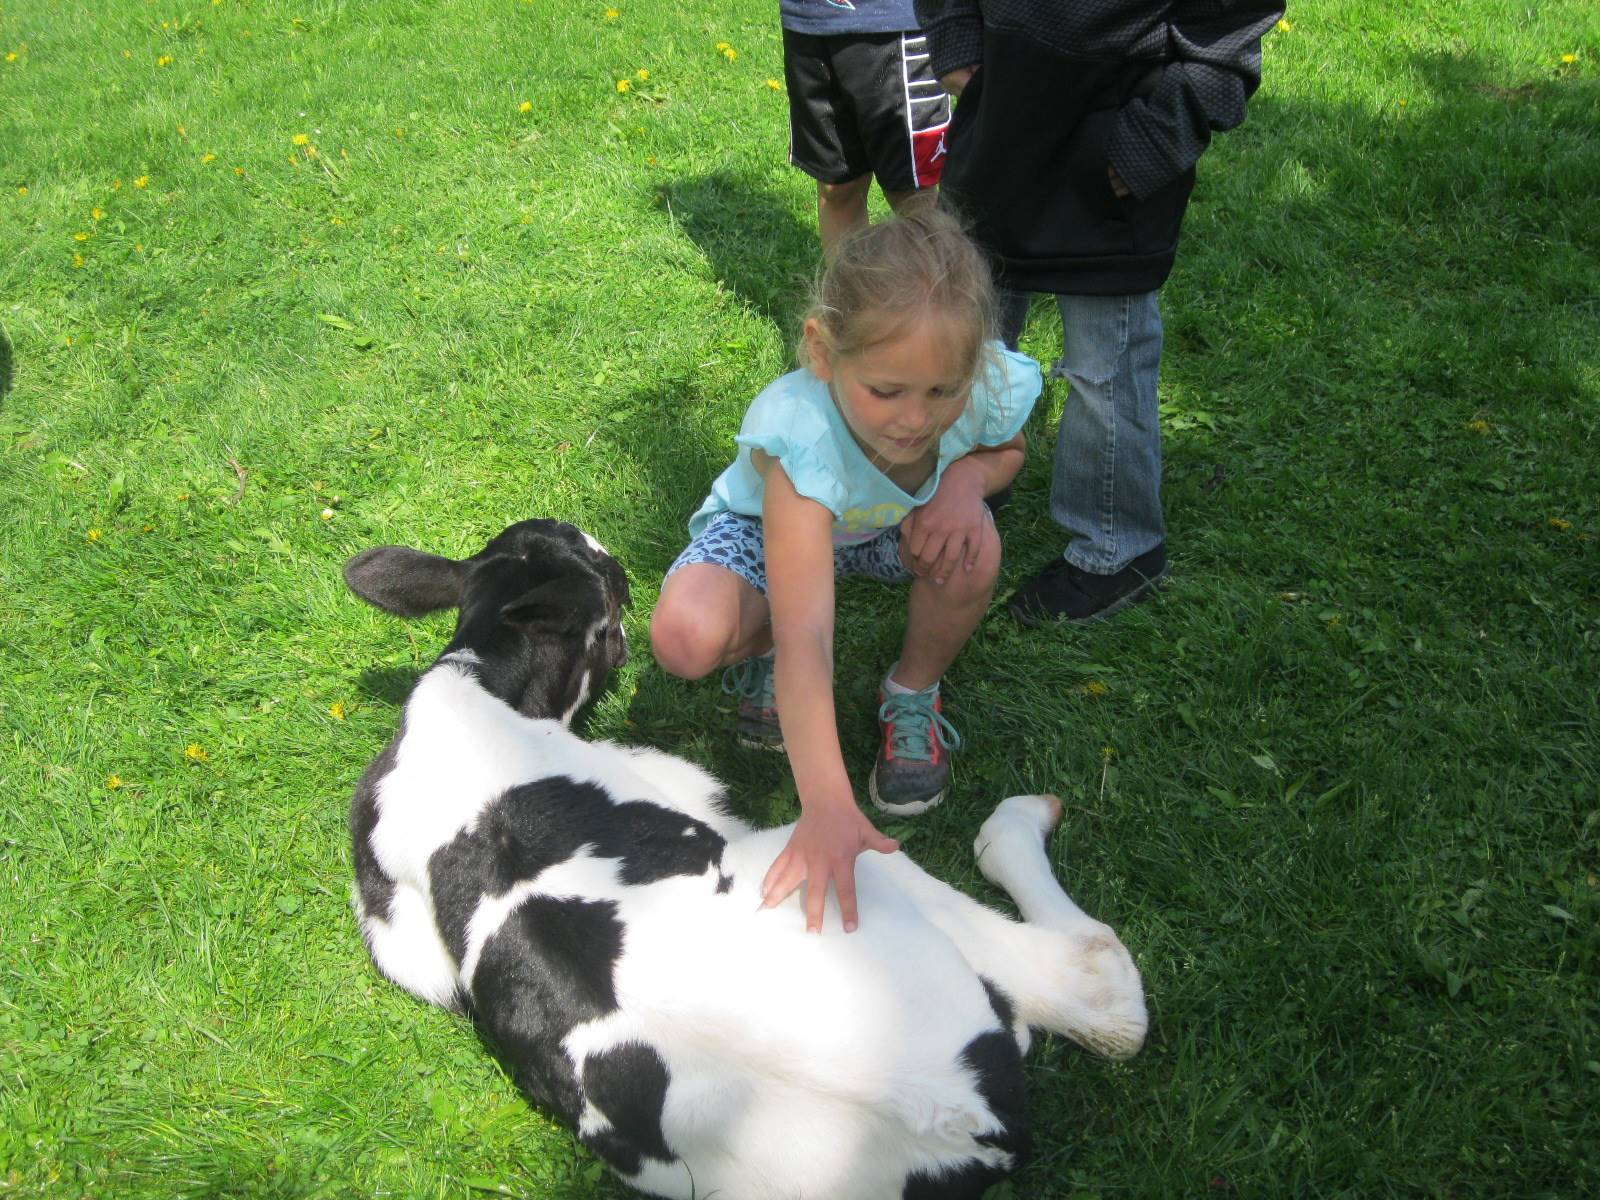 Student pets a calf called Oliver.